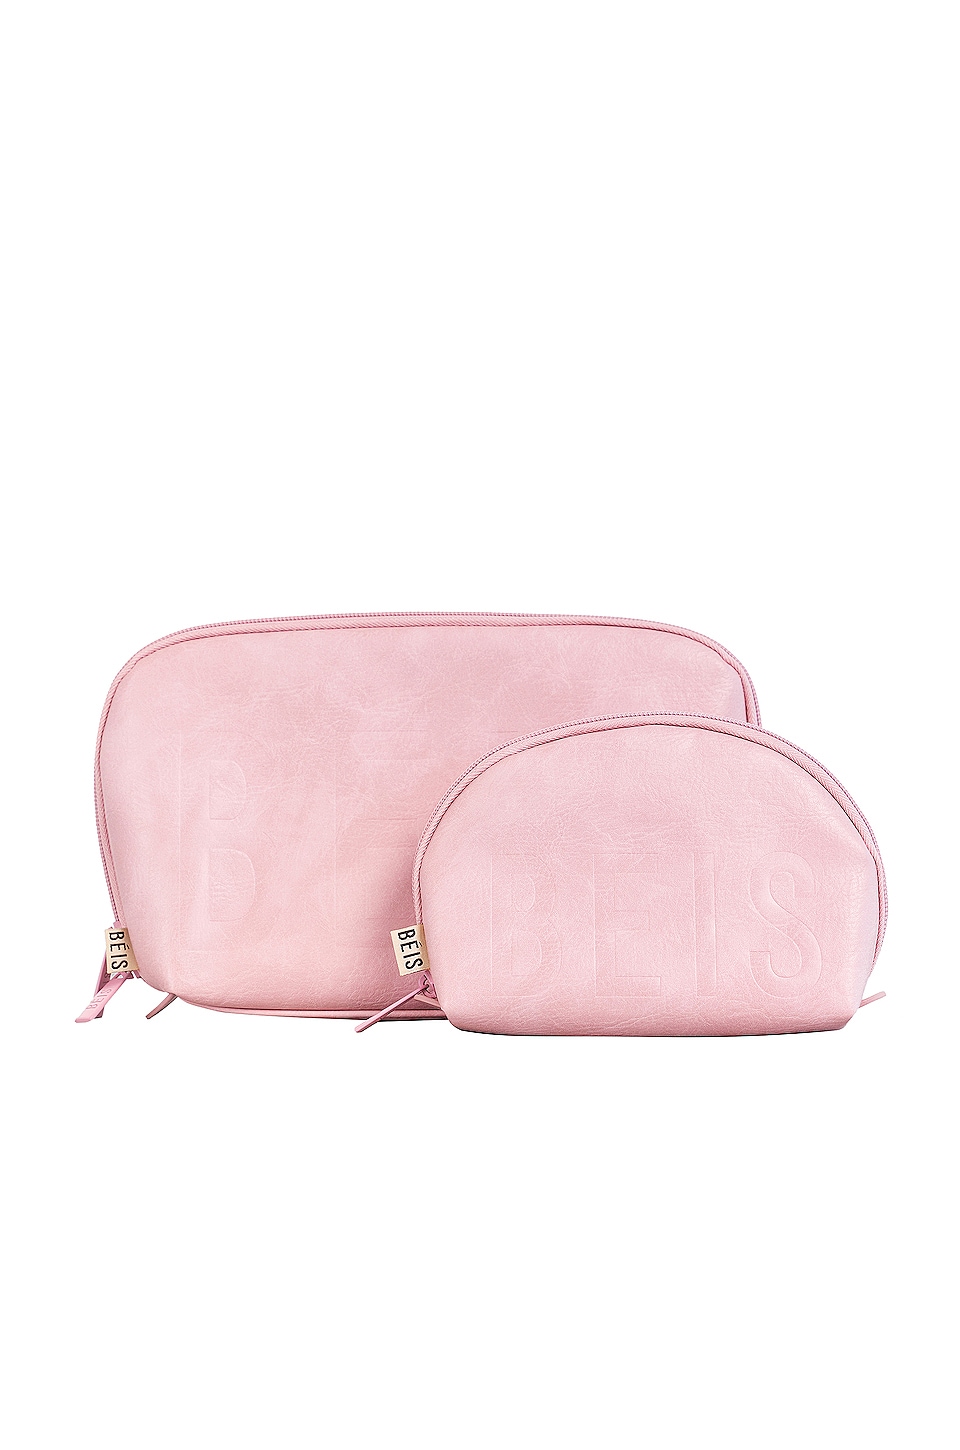 cosmetic pouch bag